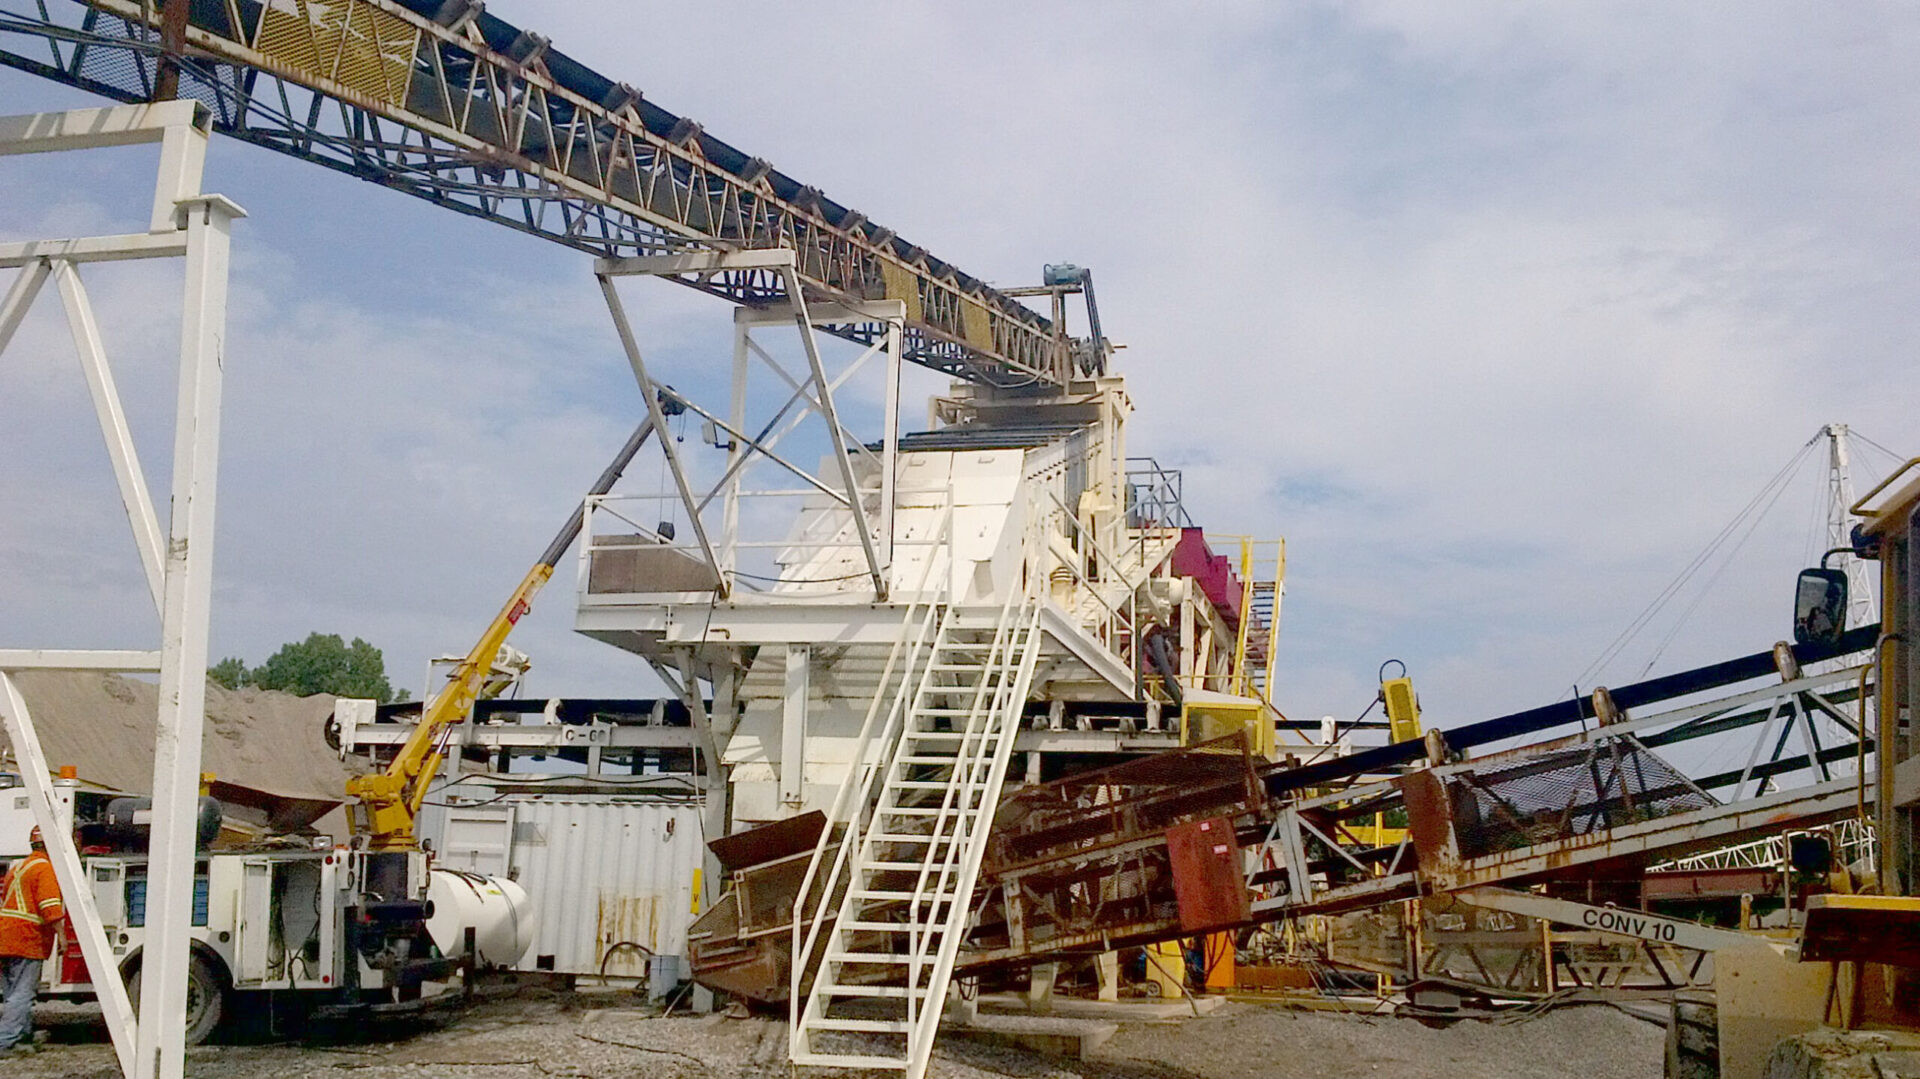 Professional Blending of Screen Media Delivers for Aggregates Operation